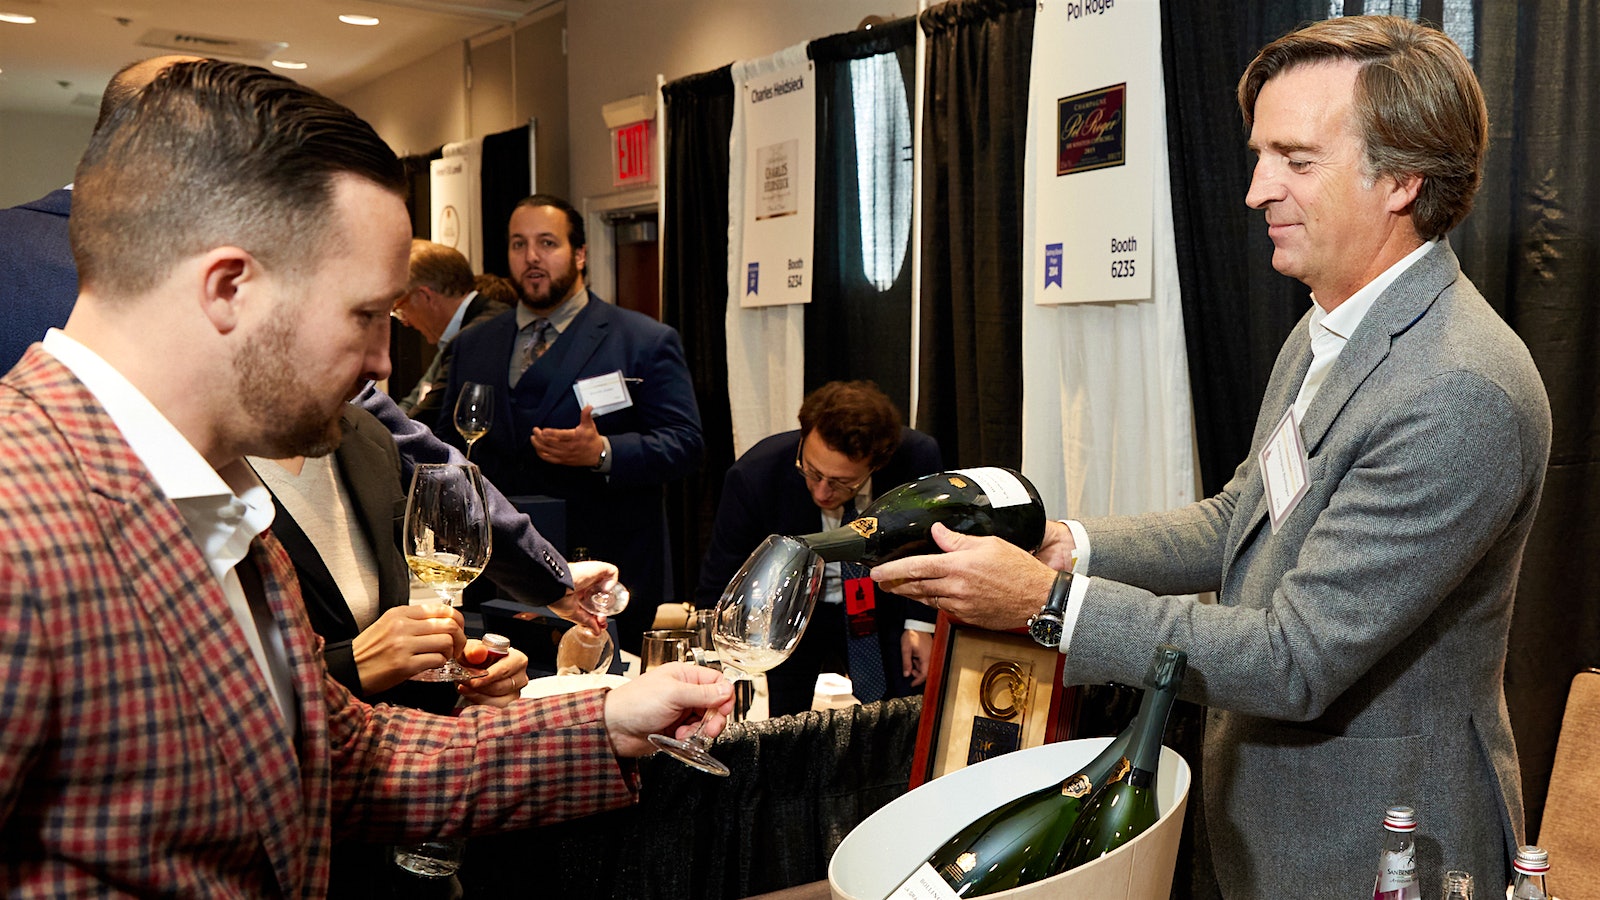  Charles-Armand de Belenet, general manager of Champagne Bollinger, pouring La Grand Année 2014 for a guest at Wine Spectator's Grand Tasting